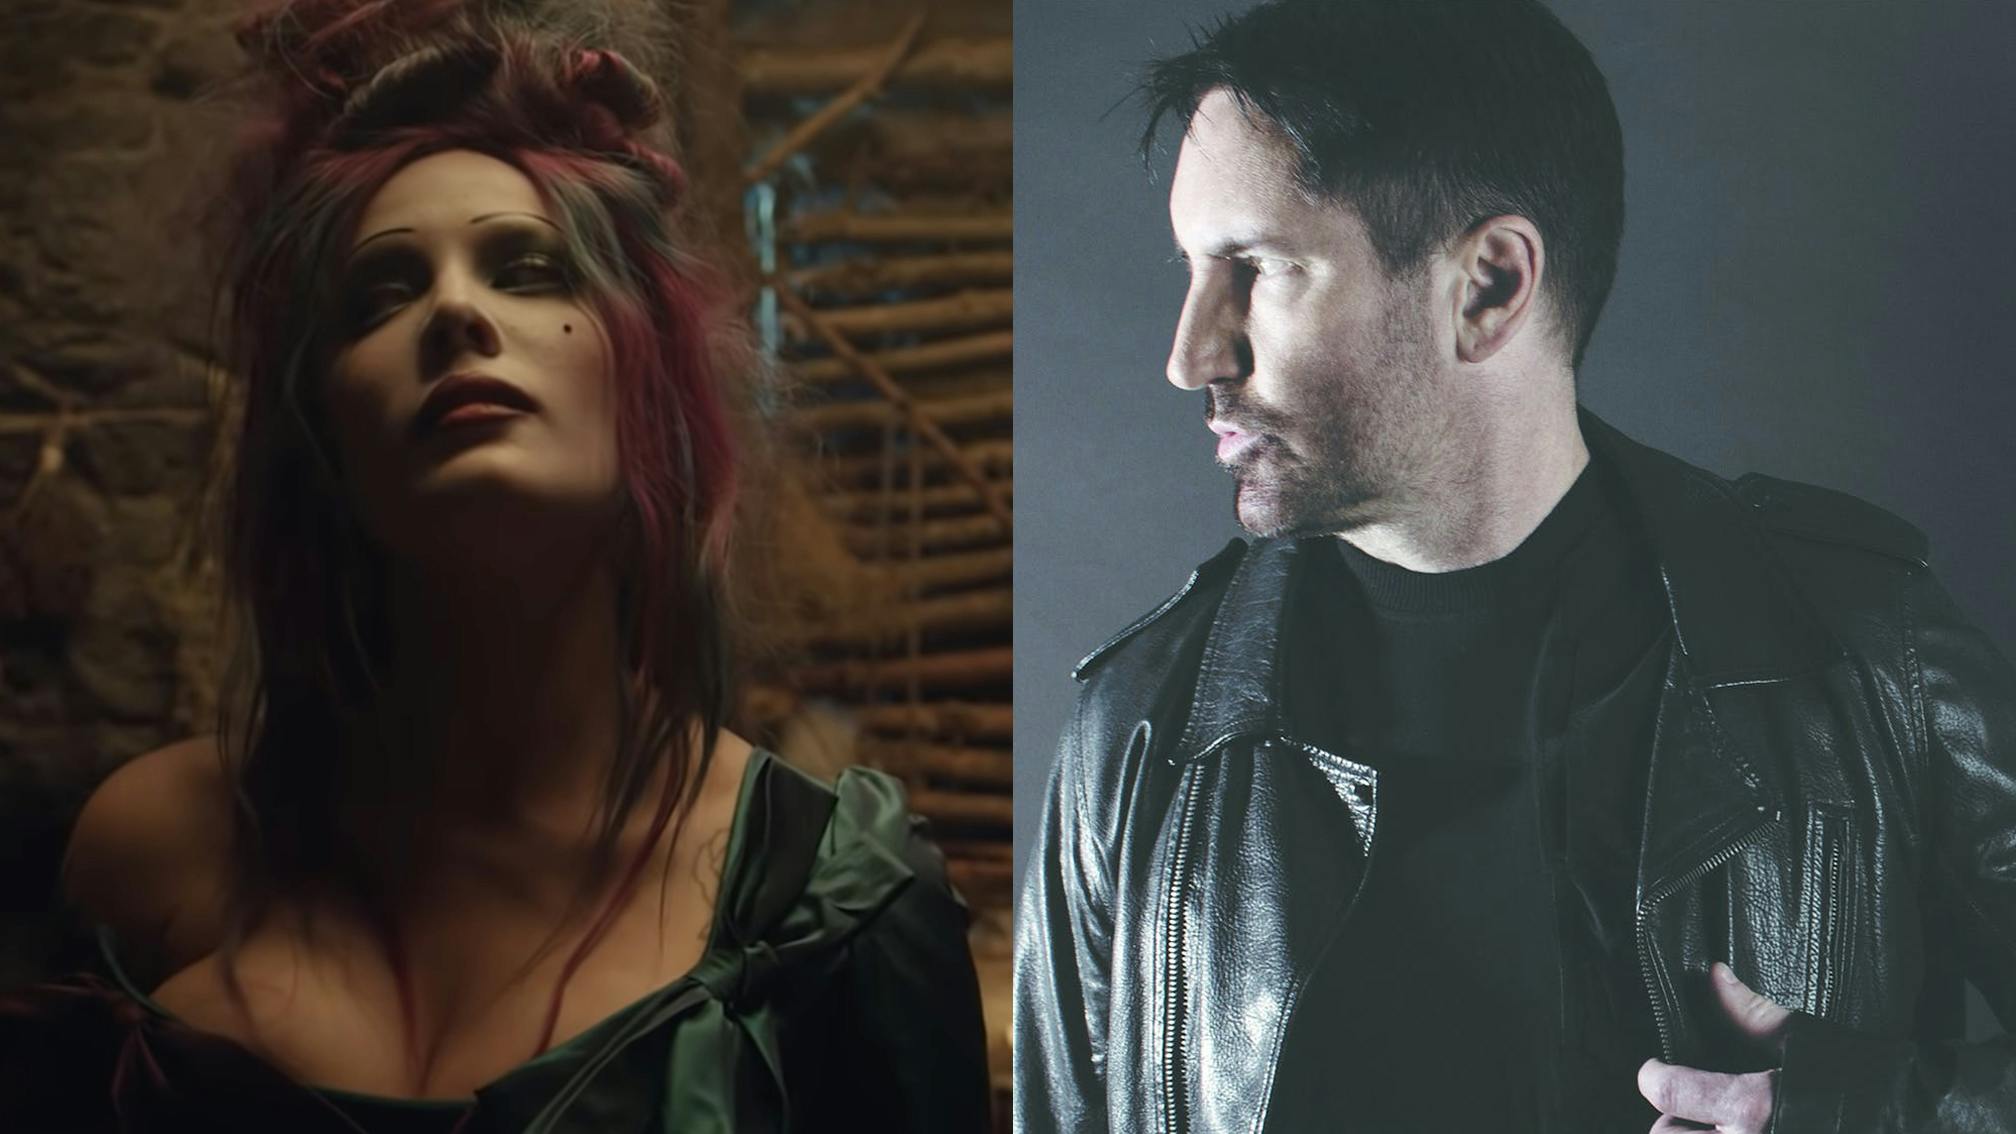 Halsey: Approaching Nine Inch Nails to collaborate was "the scariest moment of my life"